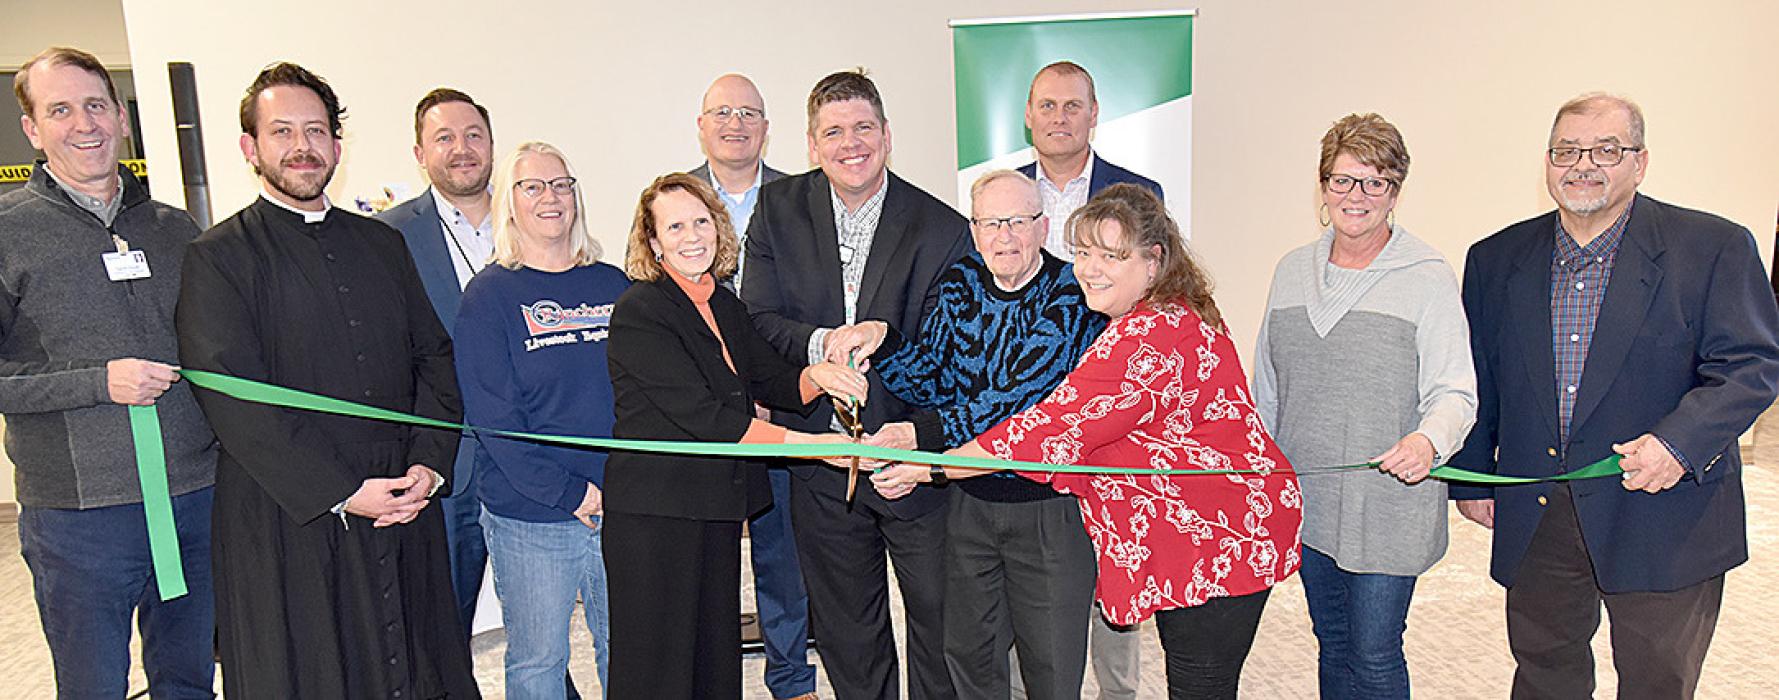 Avera executives, Gregory hospital board members, and clergy were on hand for the new health care facility’s ribbon cutting on Thursday. Shown l to r: Dave Flicek, Fr. Jonathan Dillon, Steve Tappe, Laura Petersen, Kimberly Veskrna, Bob Sutton, Tony Timanus, Emmett Kotrba, Dr. Kevin Post, Sandi Karl, Cheryl Sperl, and Dr. Rich Kafka.